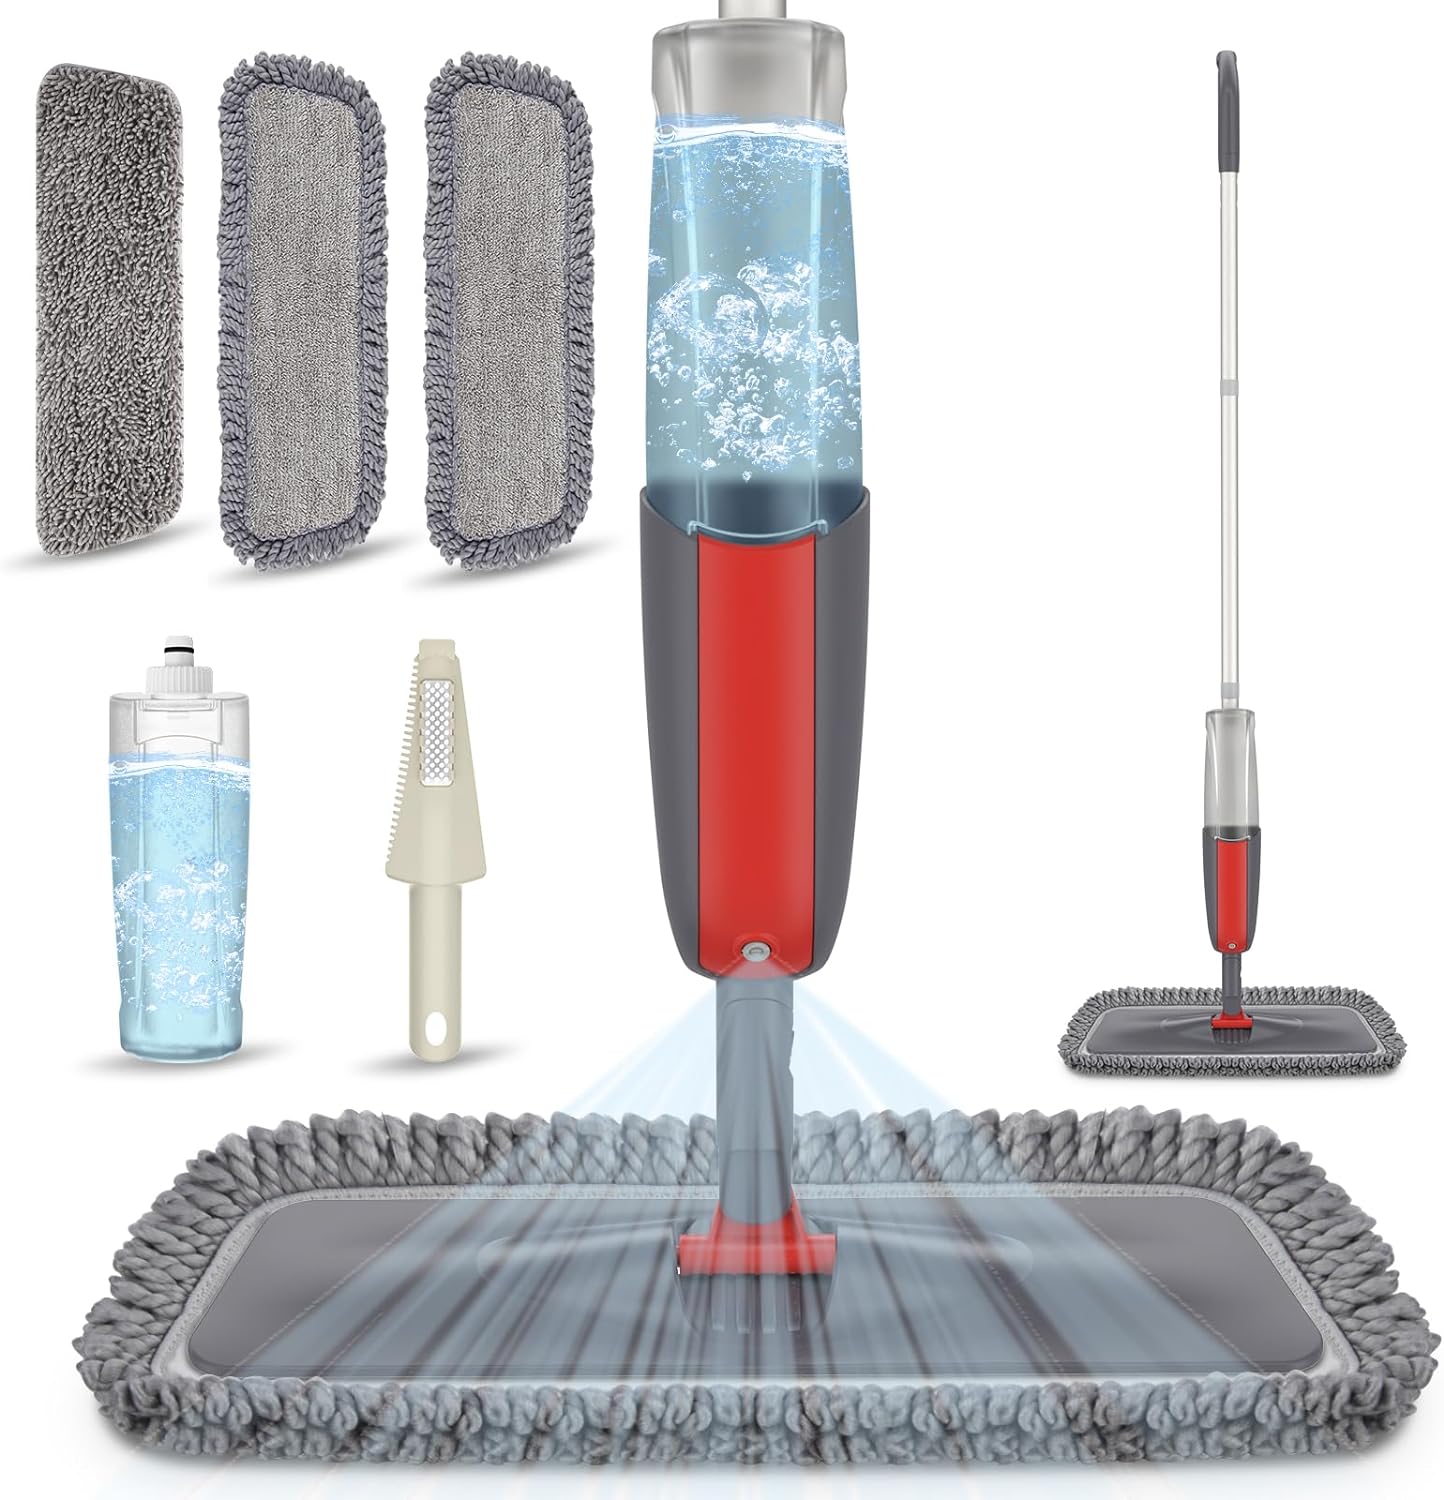 Grab It Now! MEXERRIS Microfibre Mop Spray - Exclusive Savings for You!